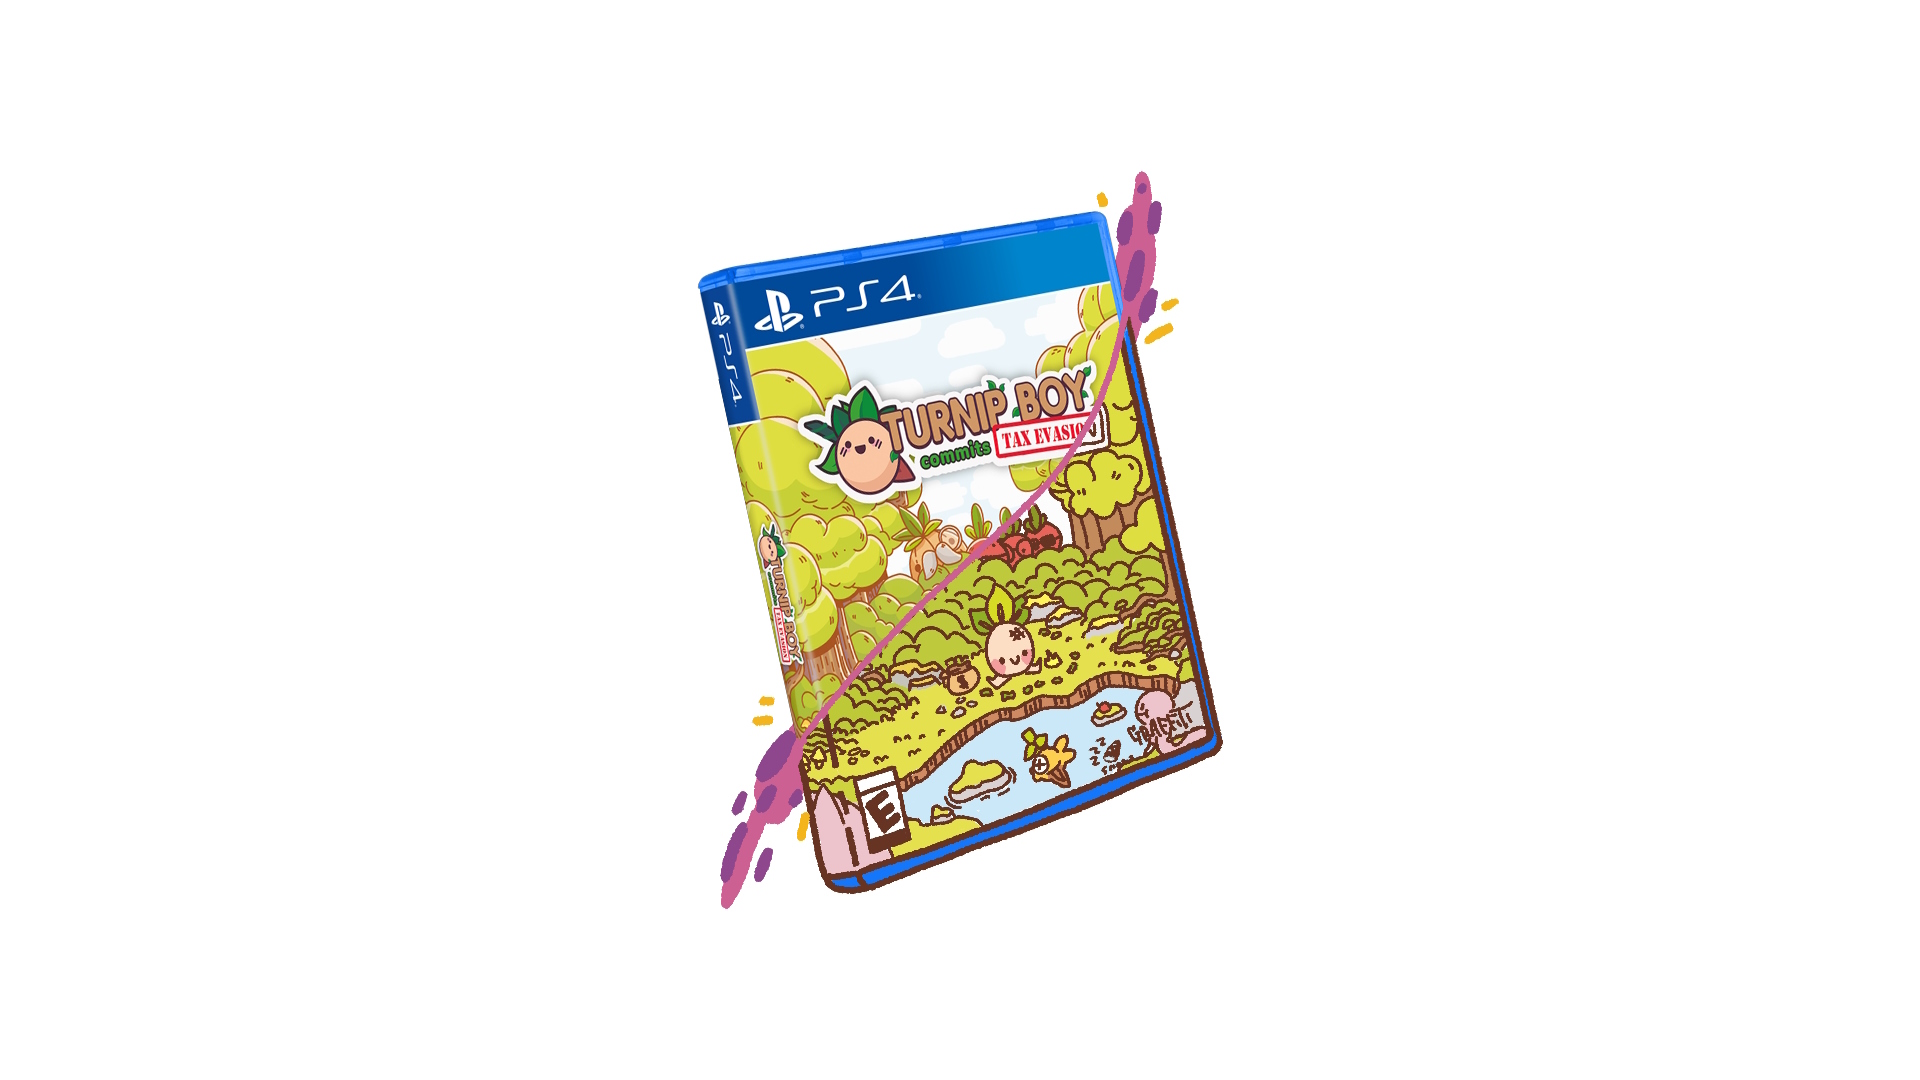 OUT!!! 💤 The | is Snoozy PS4 physical TBCTE Kazoo